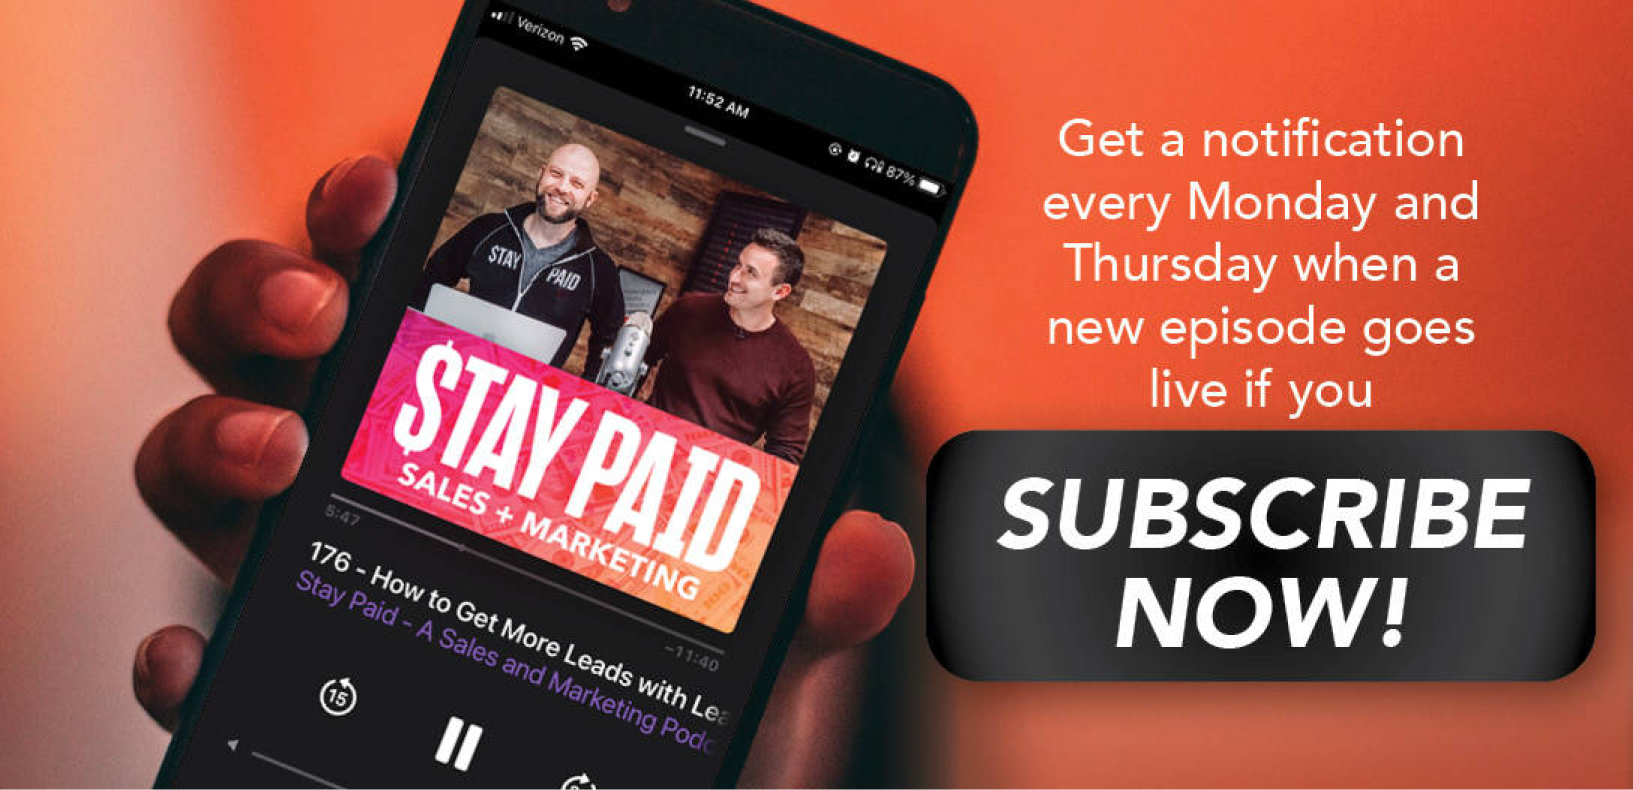 Get a notification every Monday and Thursday when a new episode goes live if you subscribe now!